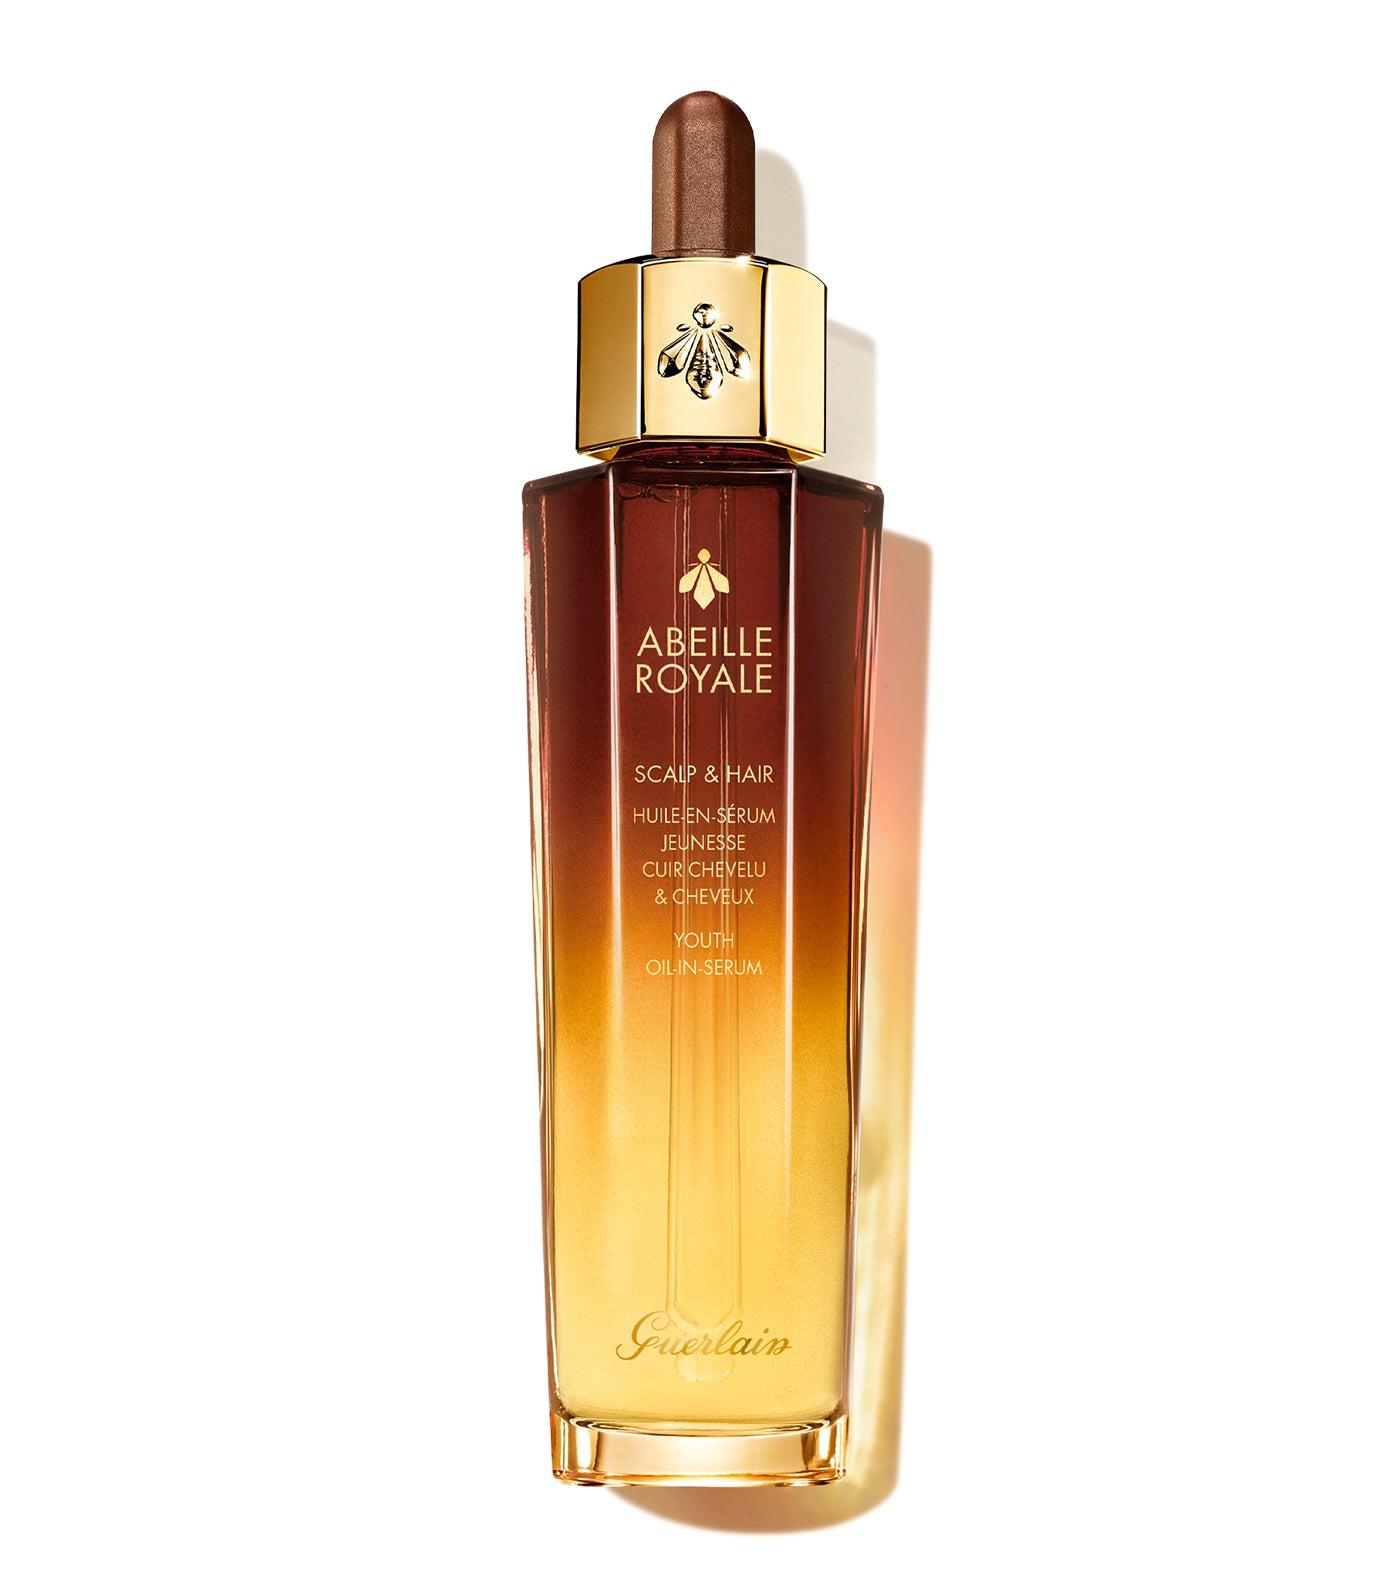 Abeille Royale Scalp & Hair Youth Oil-in Serum